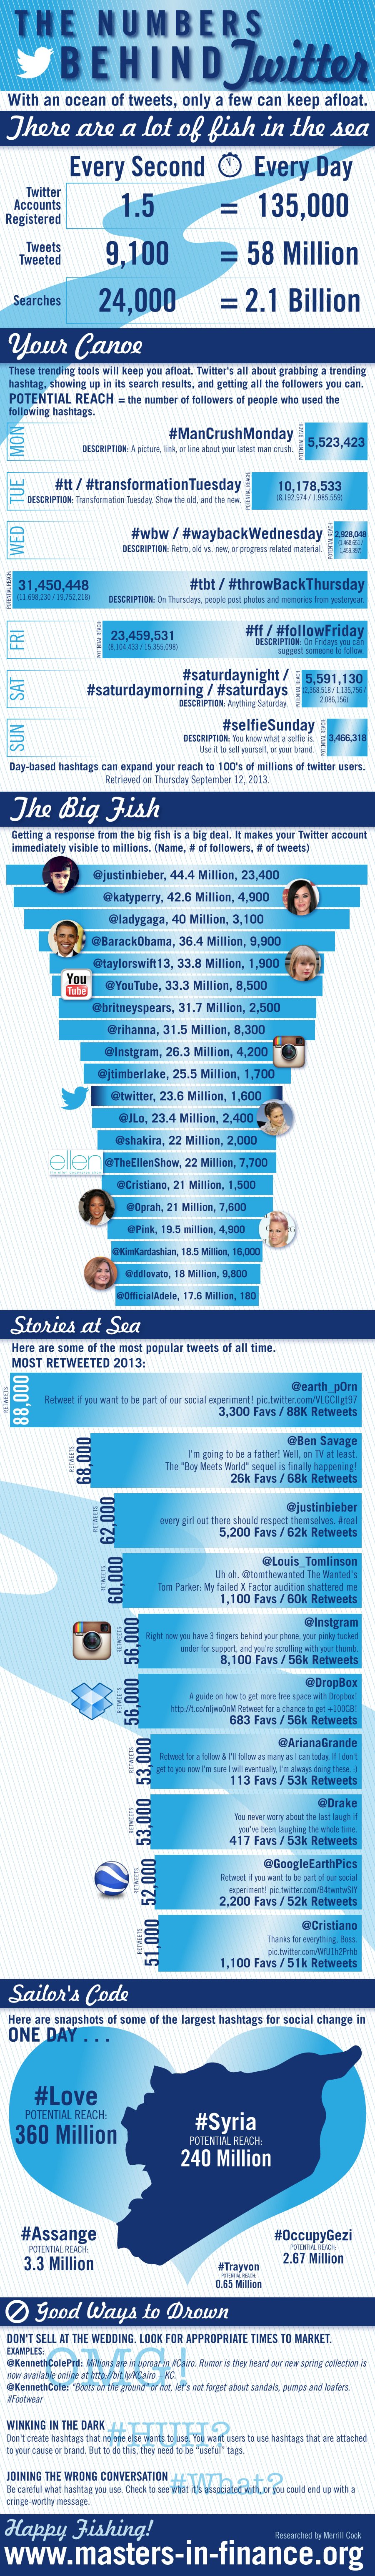 infographie-twitter-chiffres